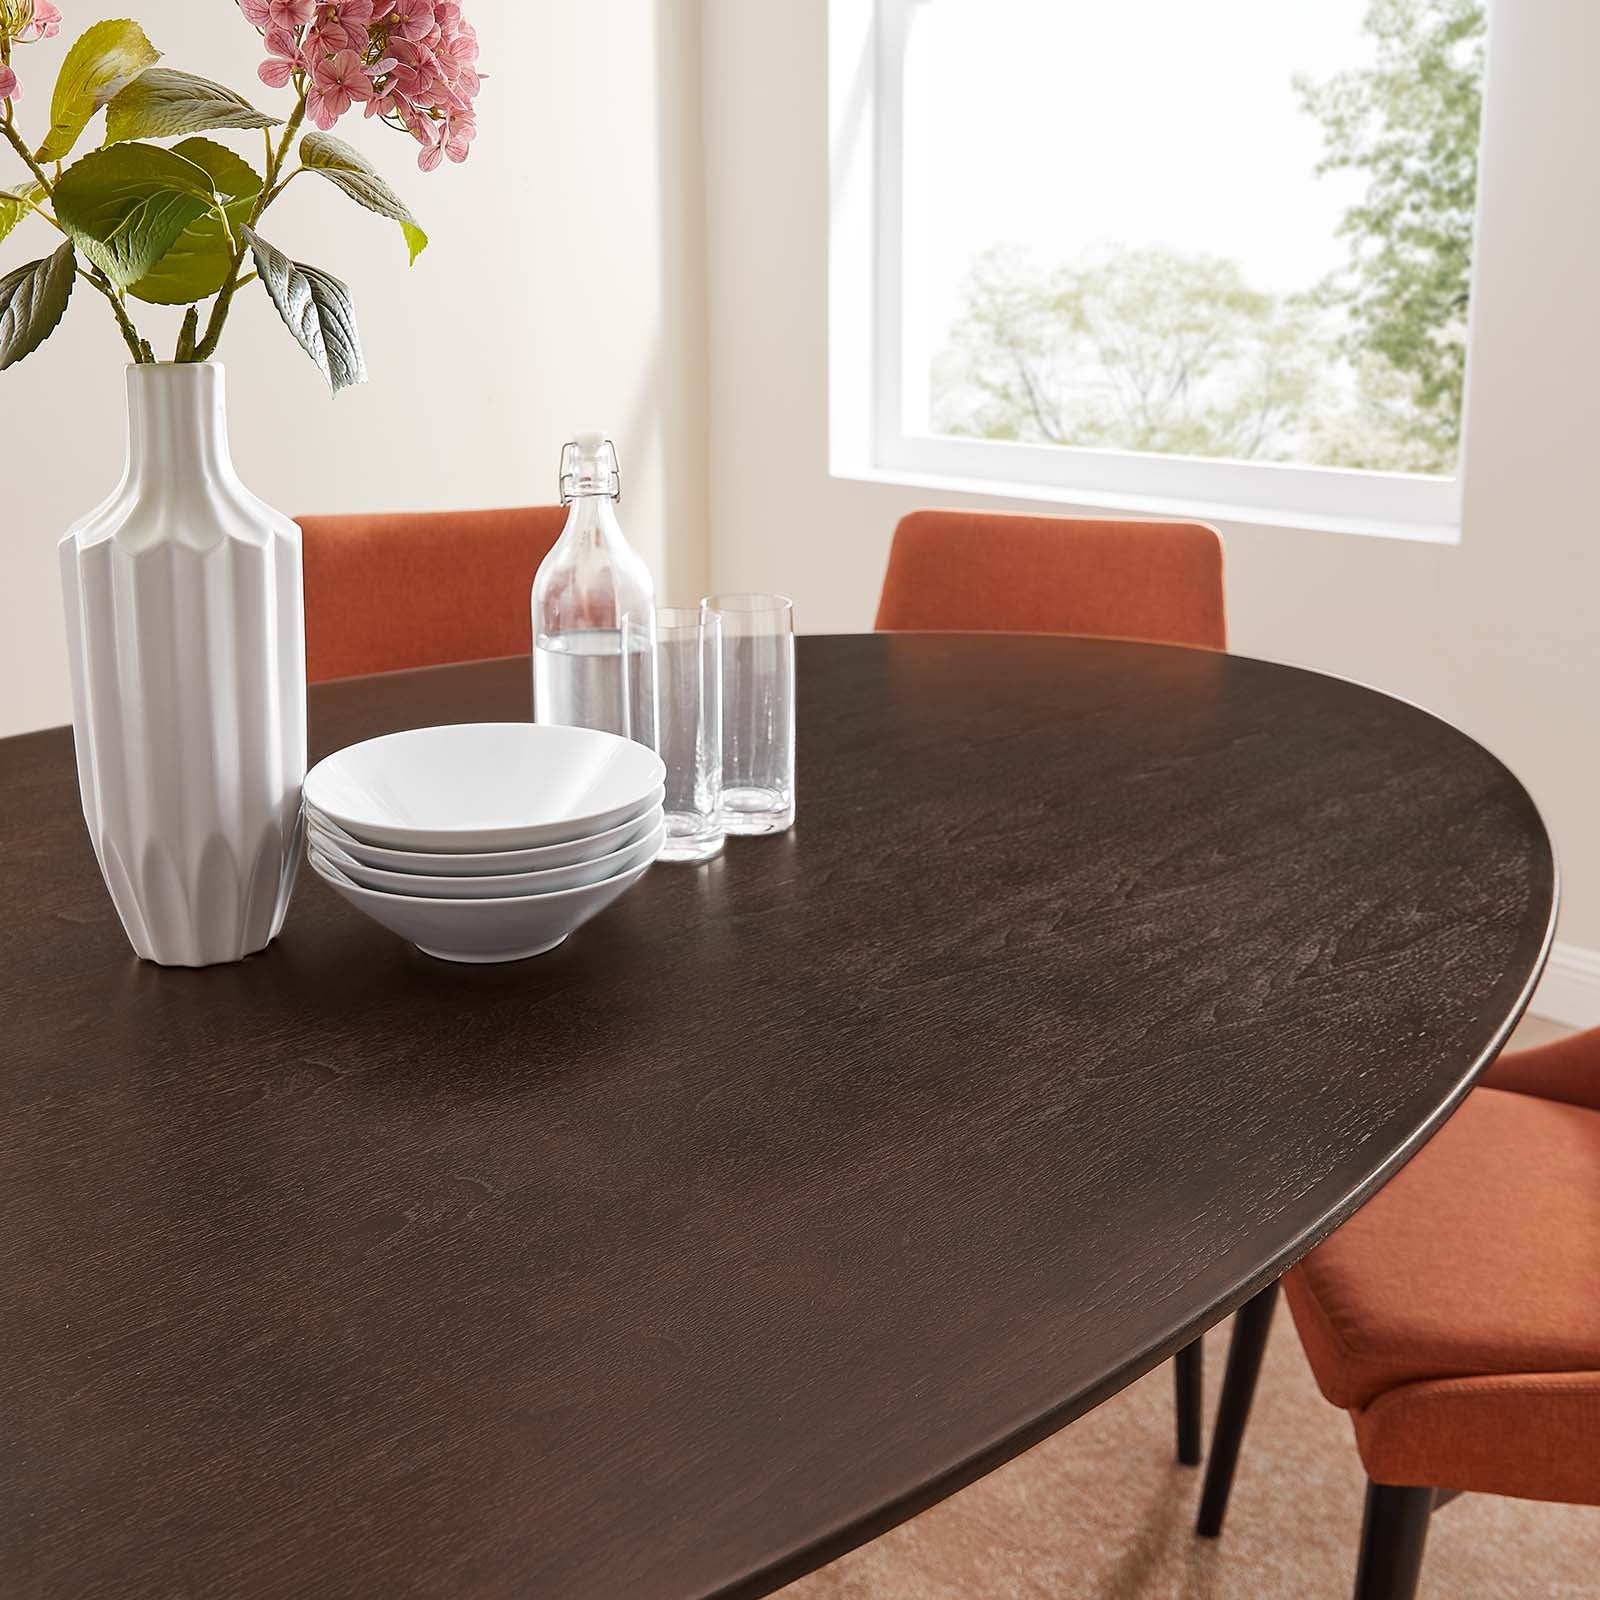 Lippa 78" Wood Oval Dining Table - East Shore Modern Home Furnishings